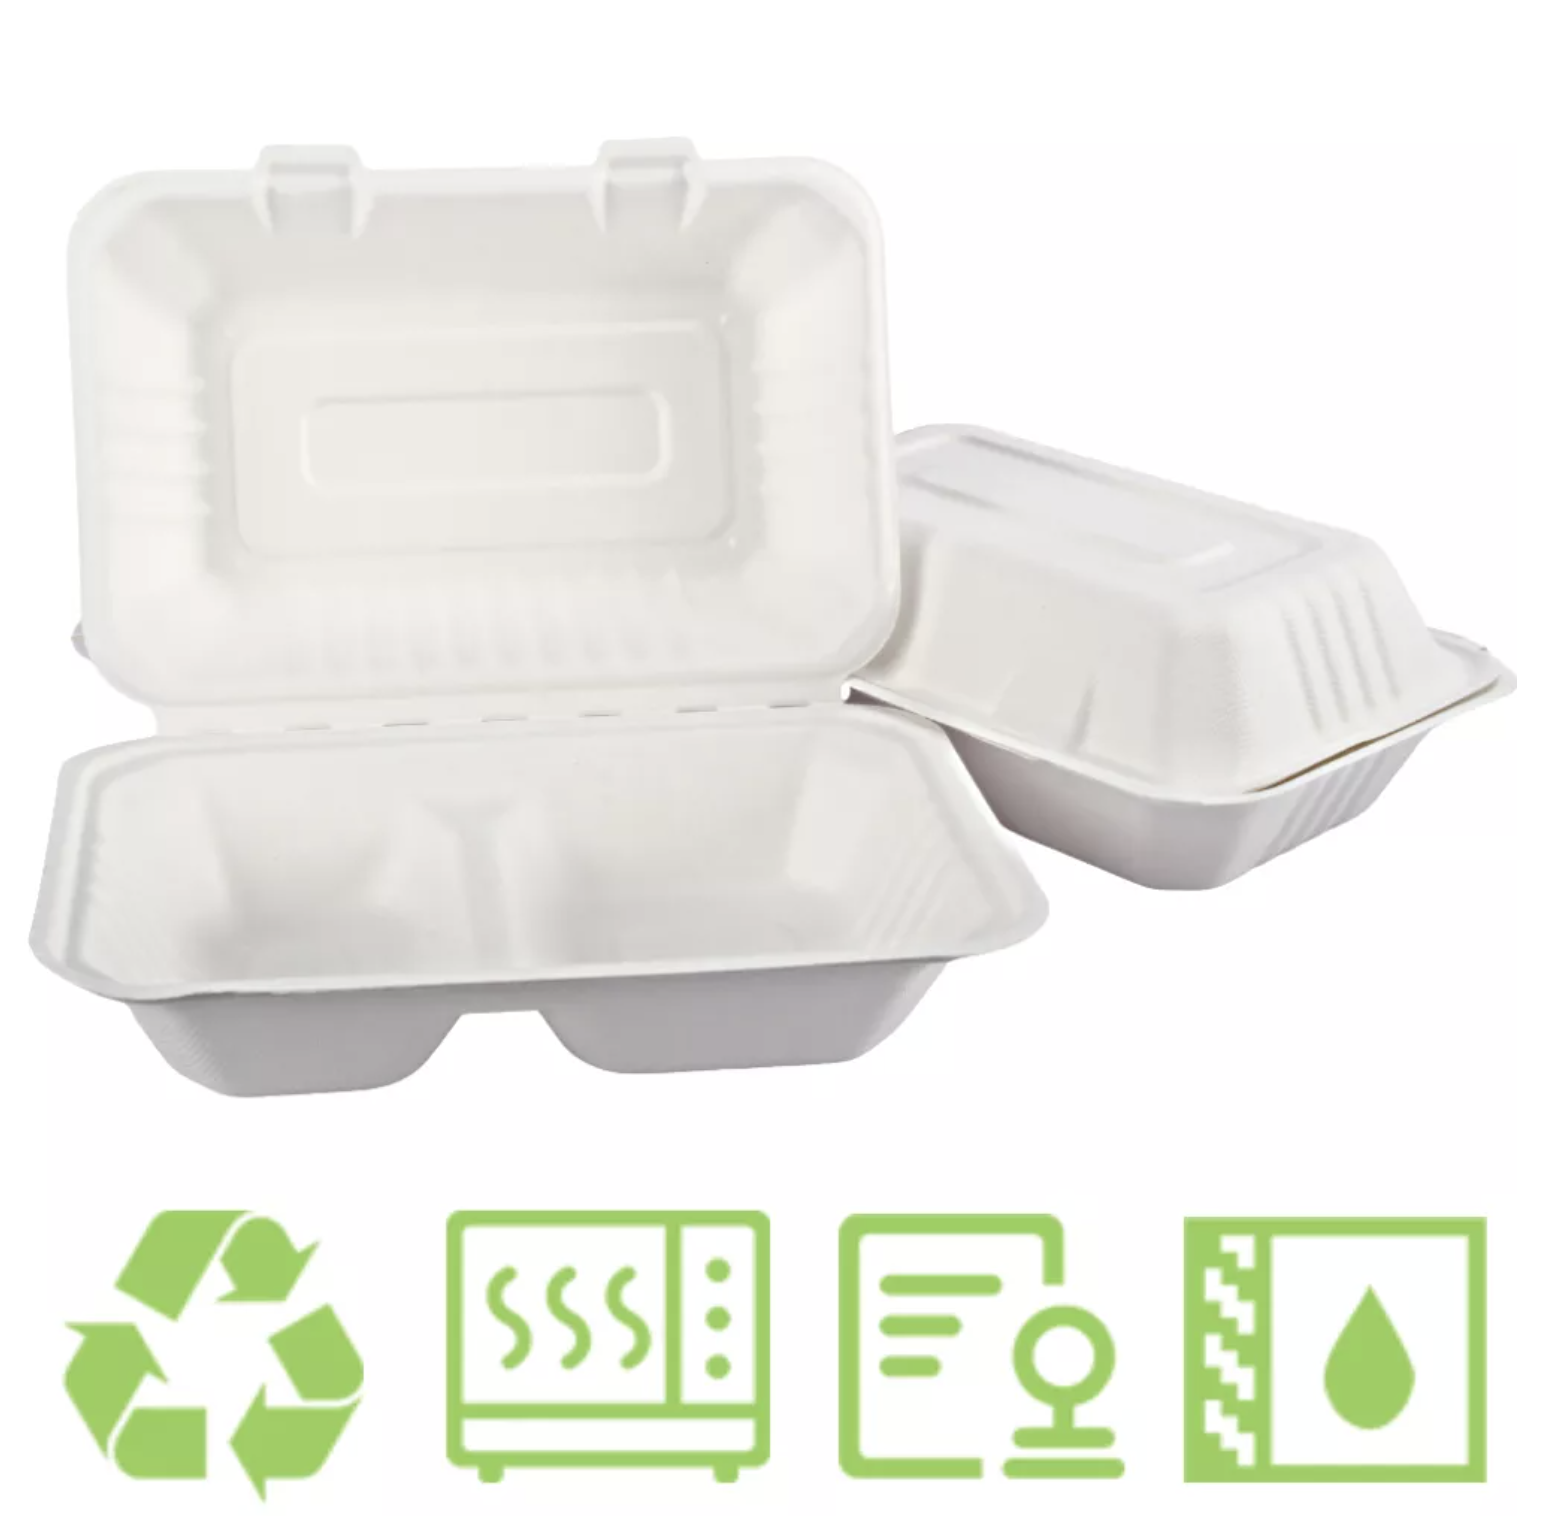 VIETDAI Introduces Plastic-Free and Recyclable Tableware Products